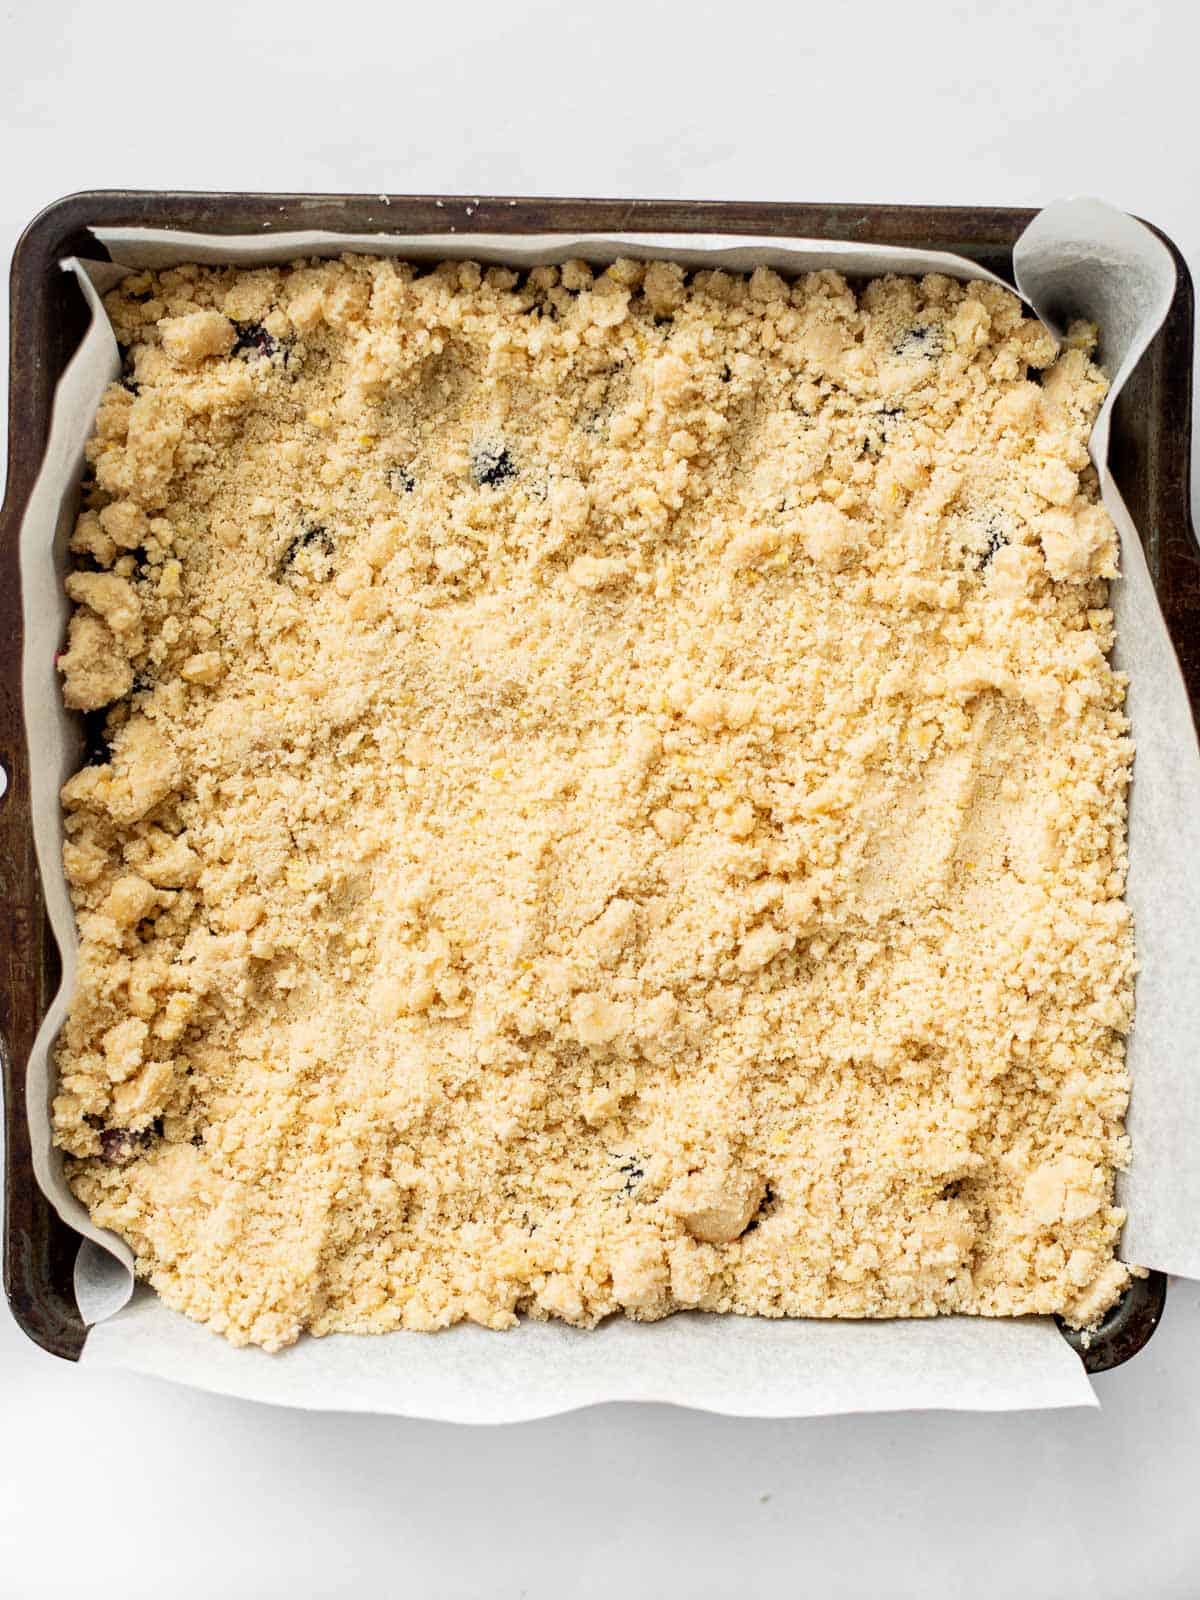 blueberry shortbread bars with crumb topping in a baking pan.